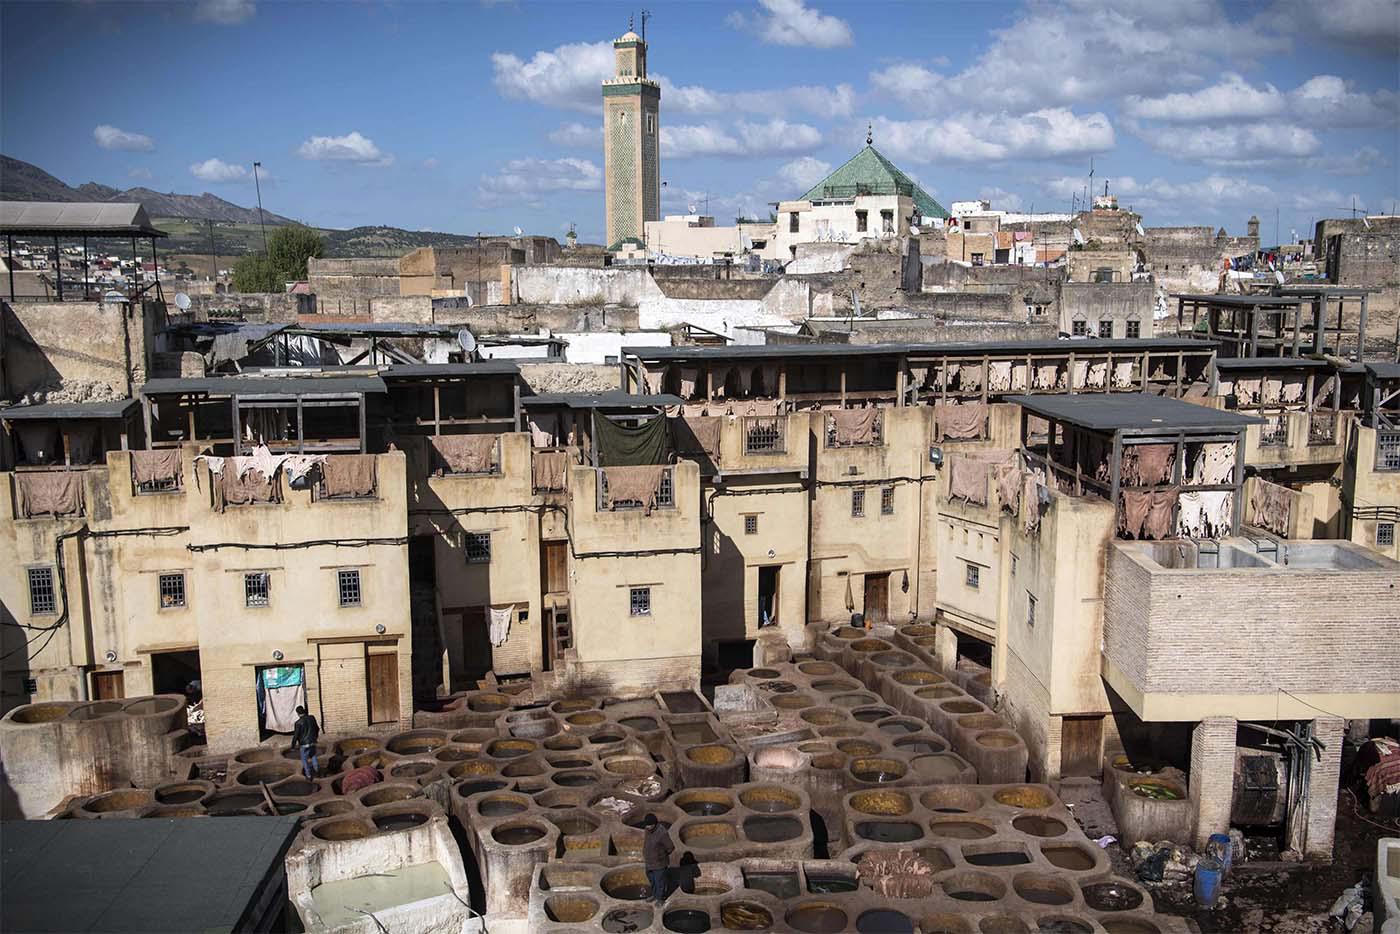 Facelift helps Morocco's Old City of Fez lure tourists